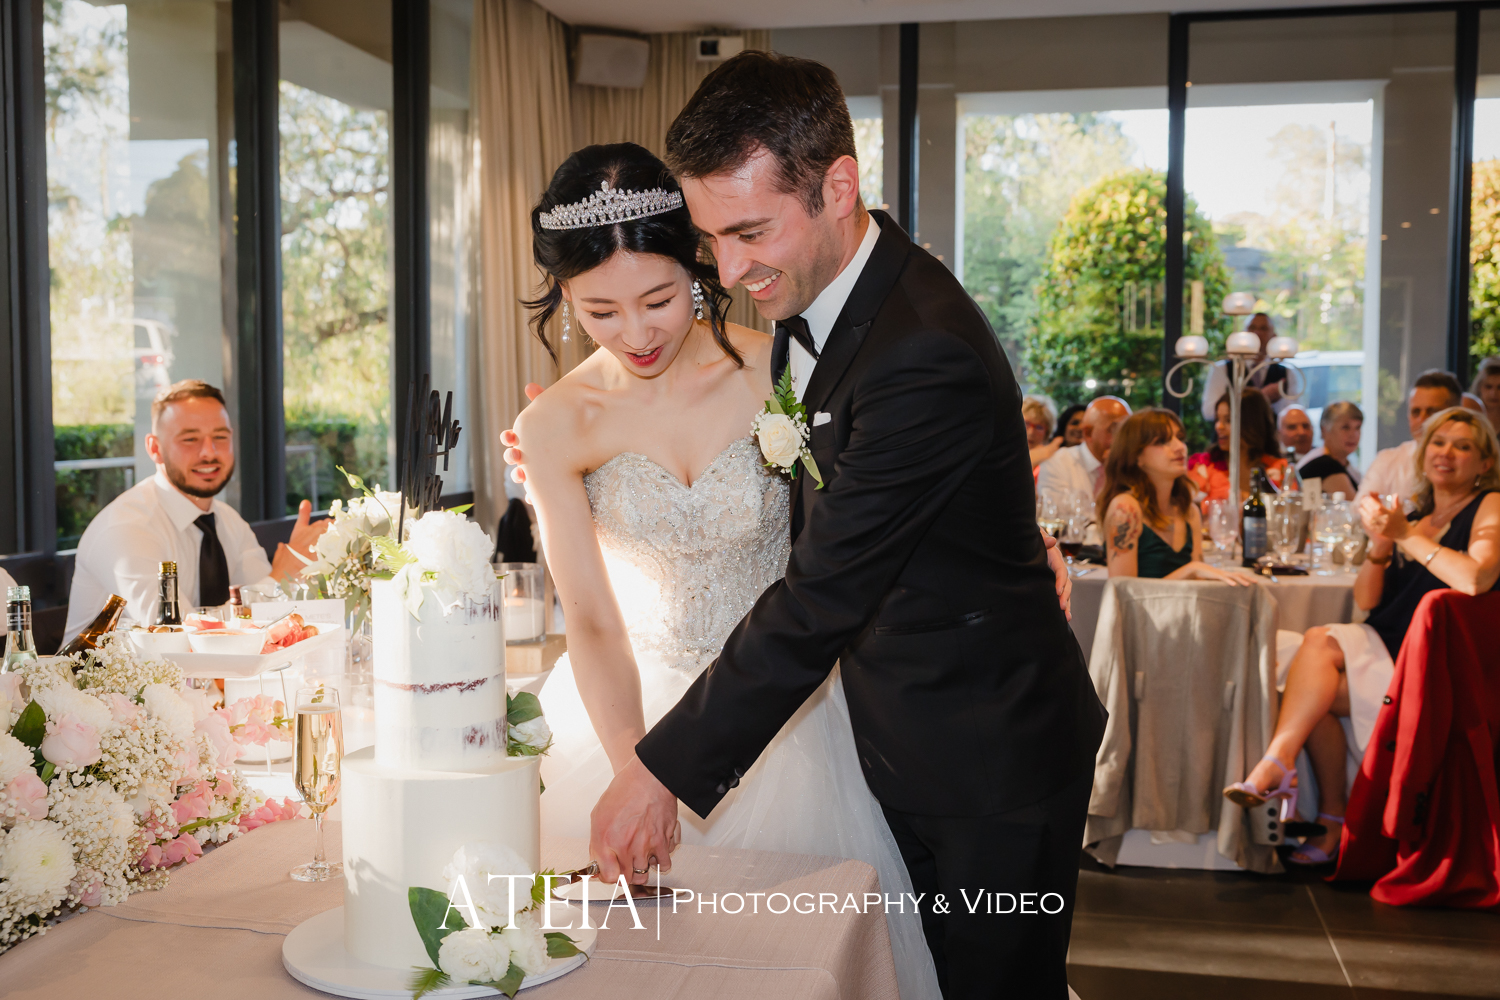 , Jenny and Adrian&#8217;s wedding photography at Leonda by the Yarra captured by ATEIA Photography &#038; Video